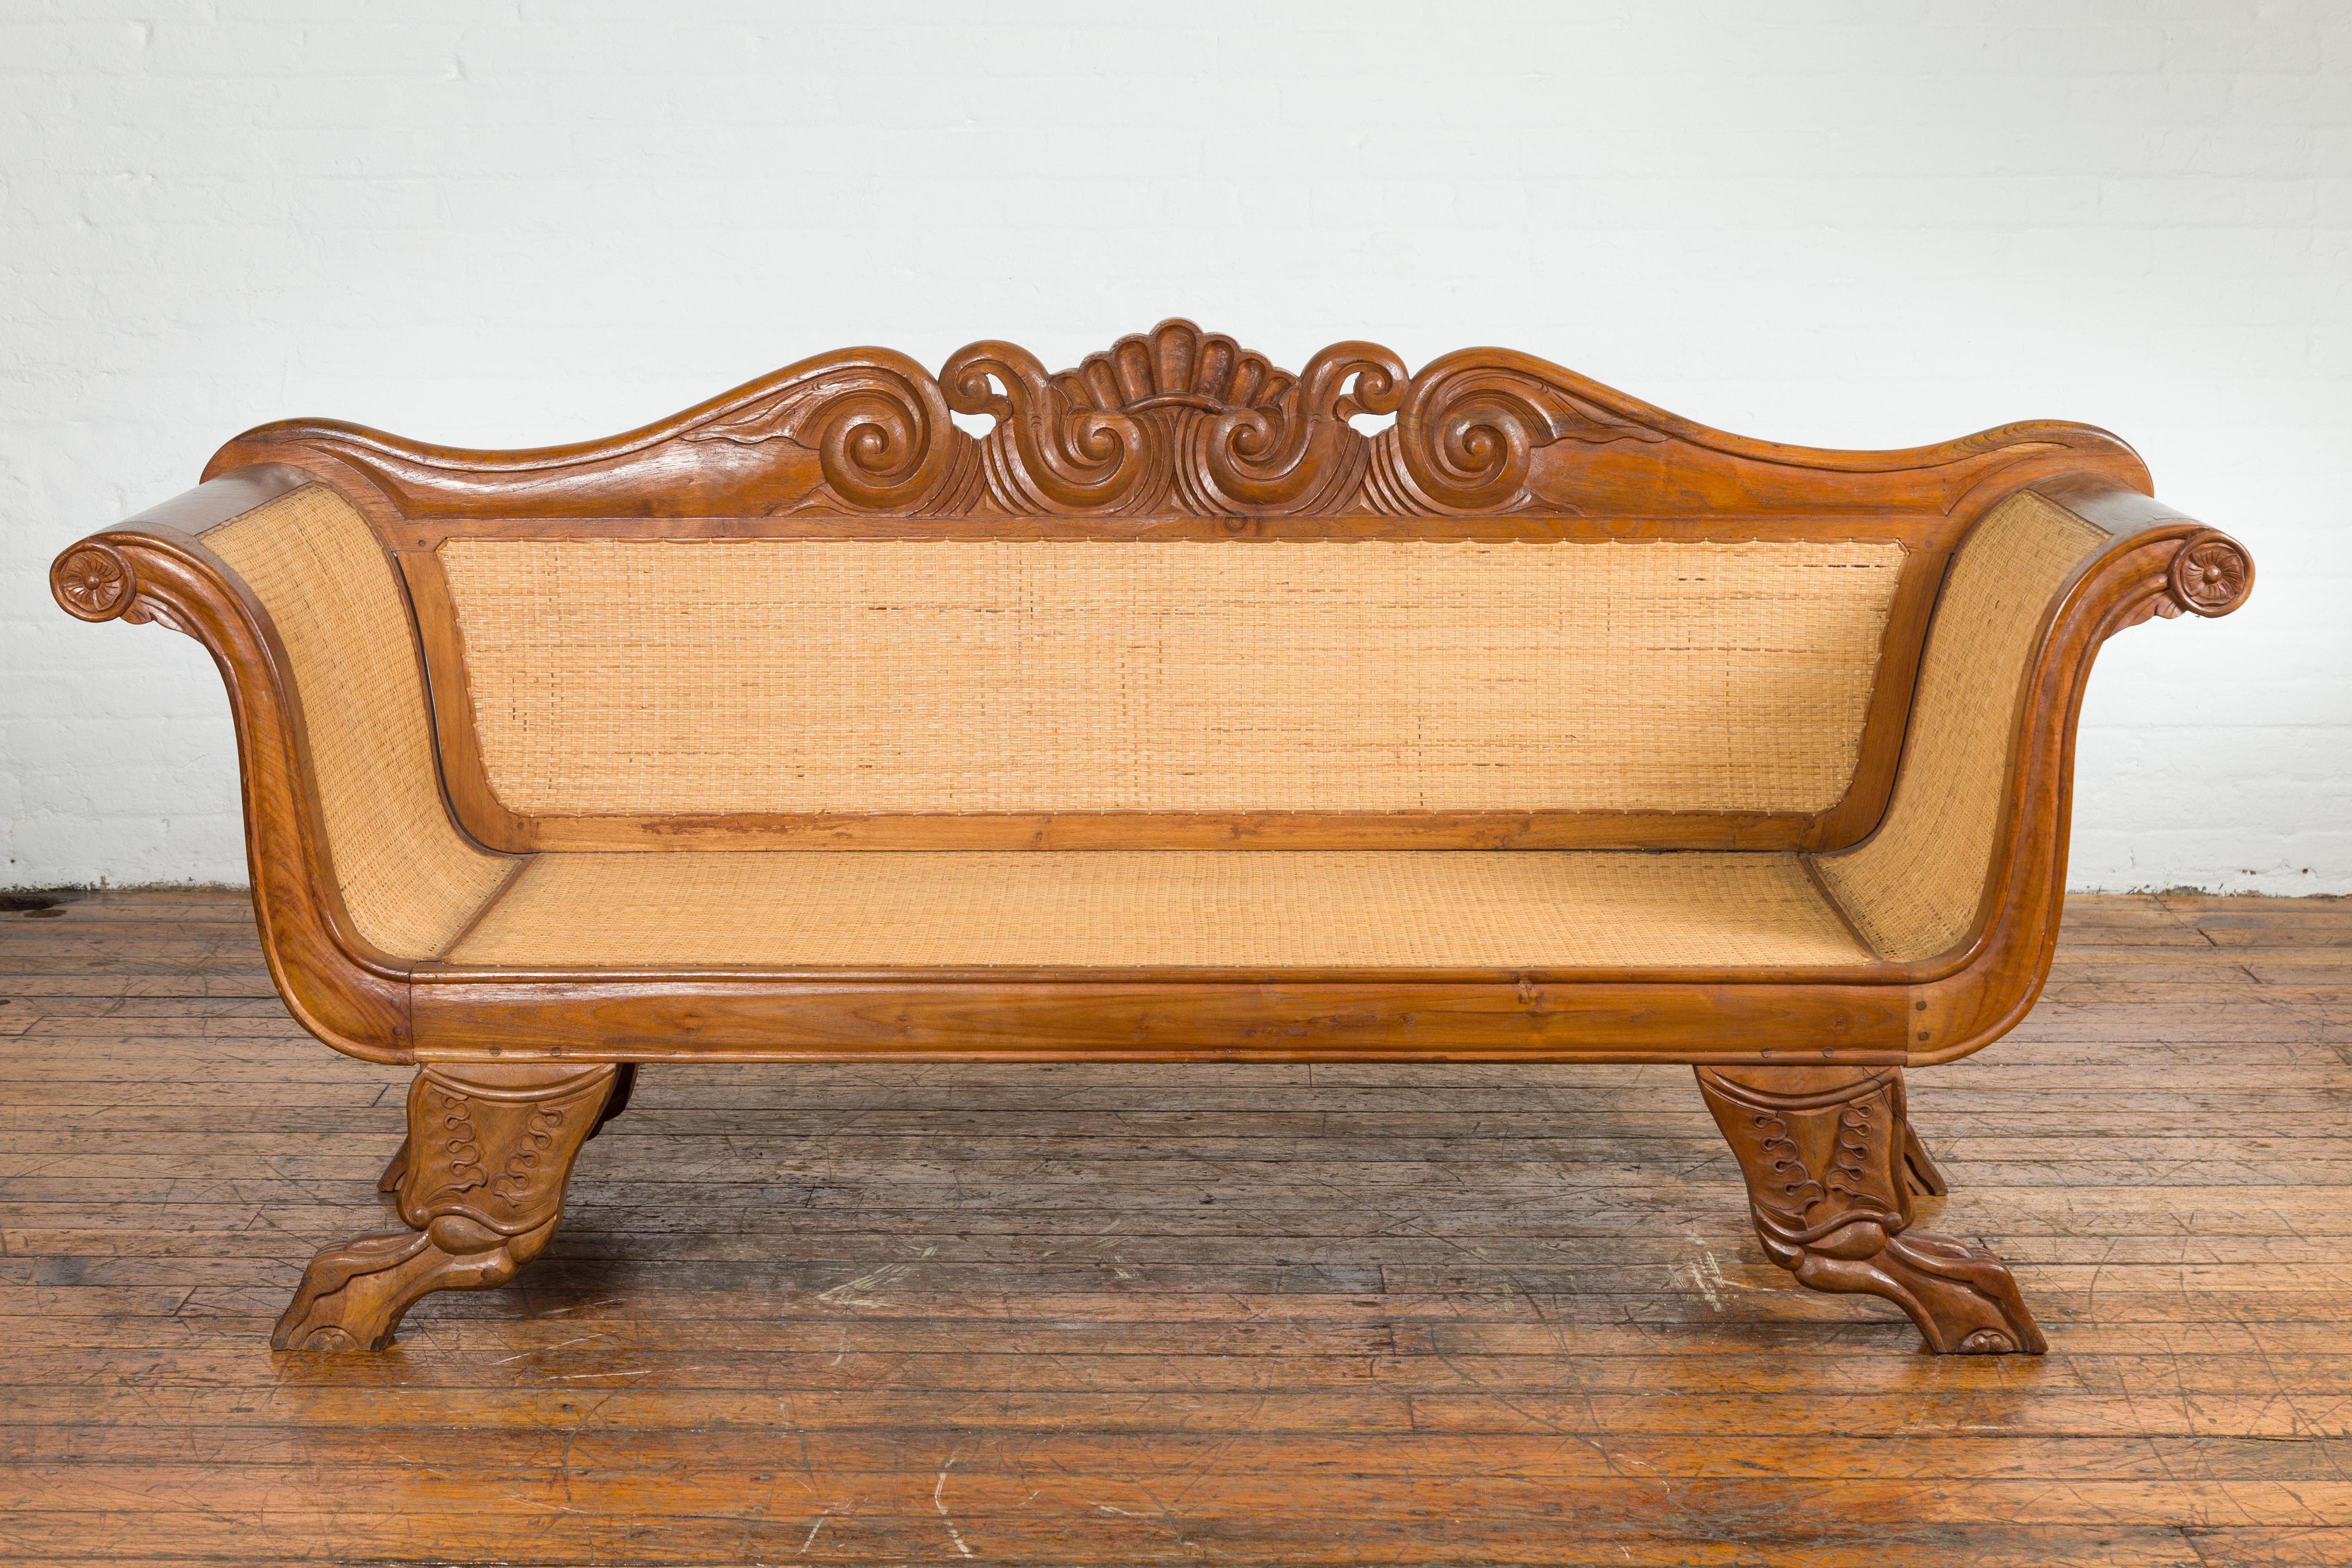 An antique Dutch Colonial period Javanese teak wood settee from the early 20th century, with inset woven rattan, carved back, large out-scrolling arms and curving legs. Created on the Island of Java during the early years of the 20th century, this